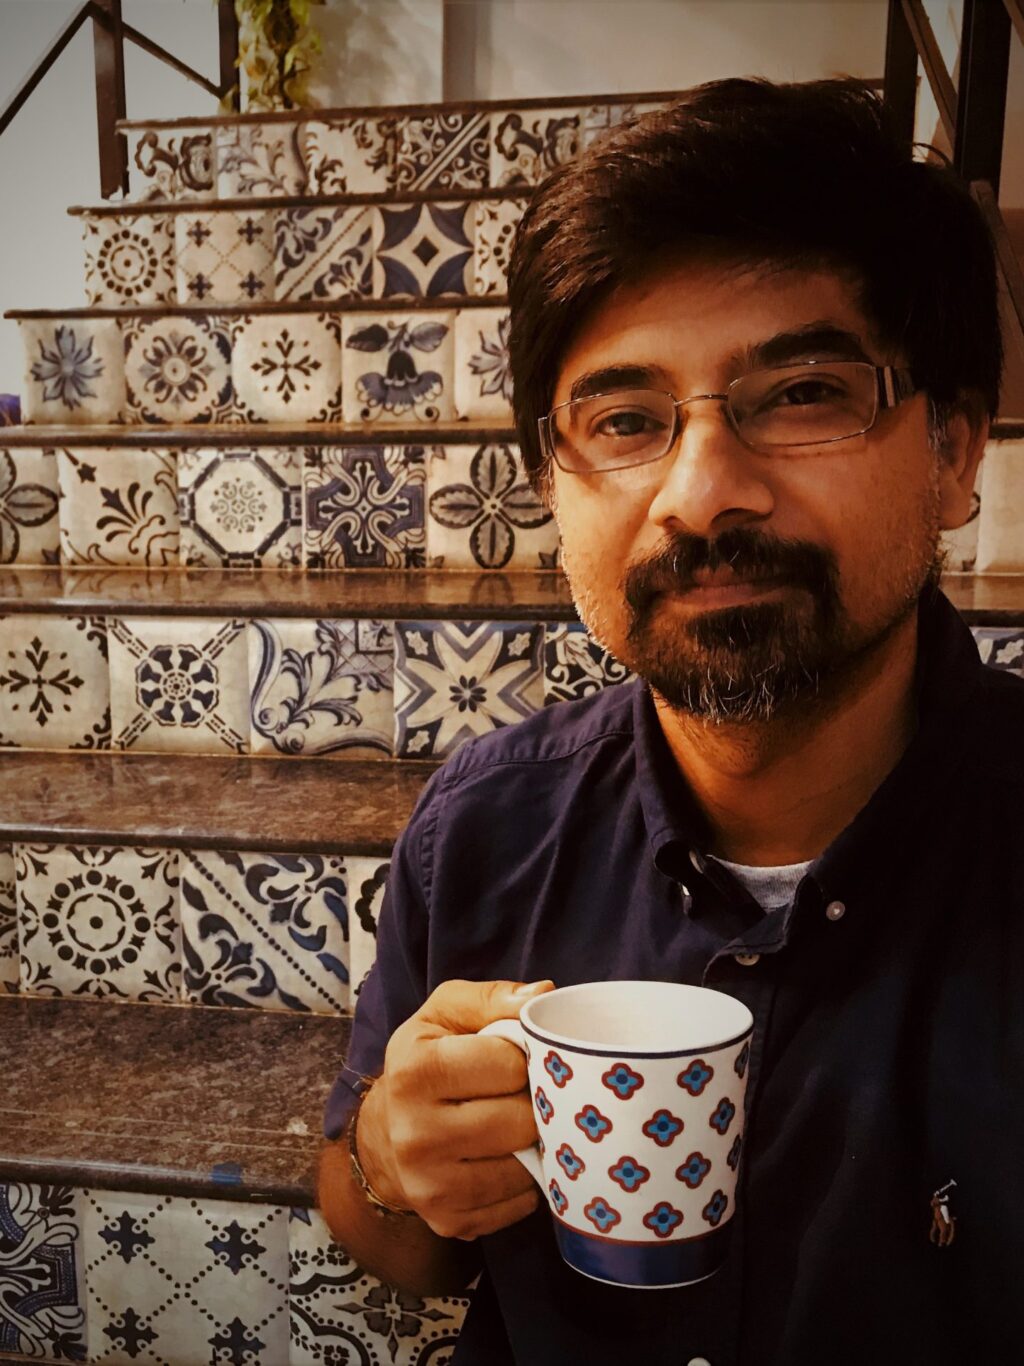 a man with black hair, wearing glasses and a beard, holding a coffee cup